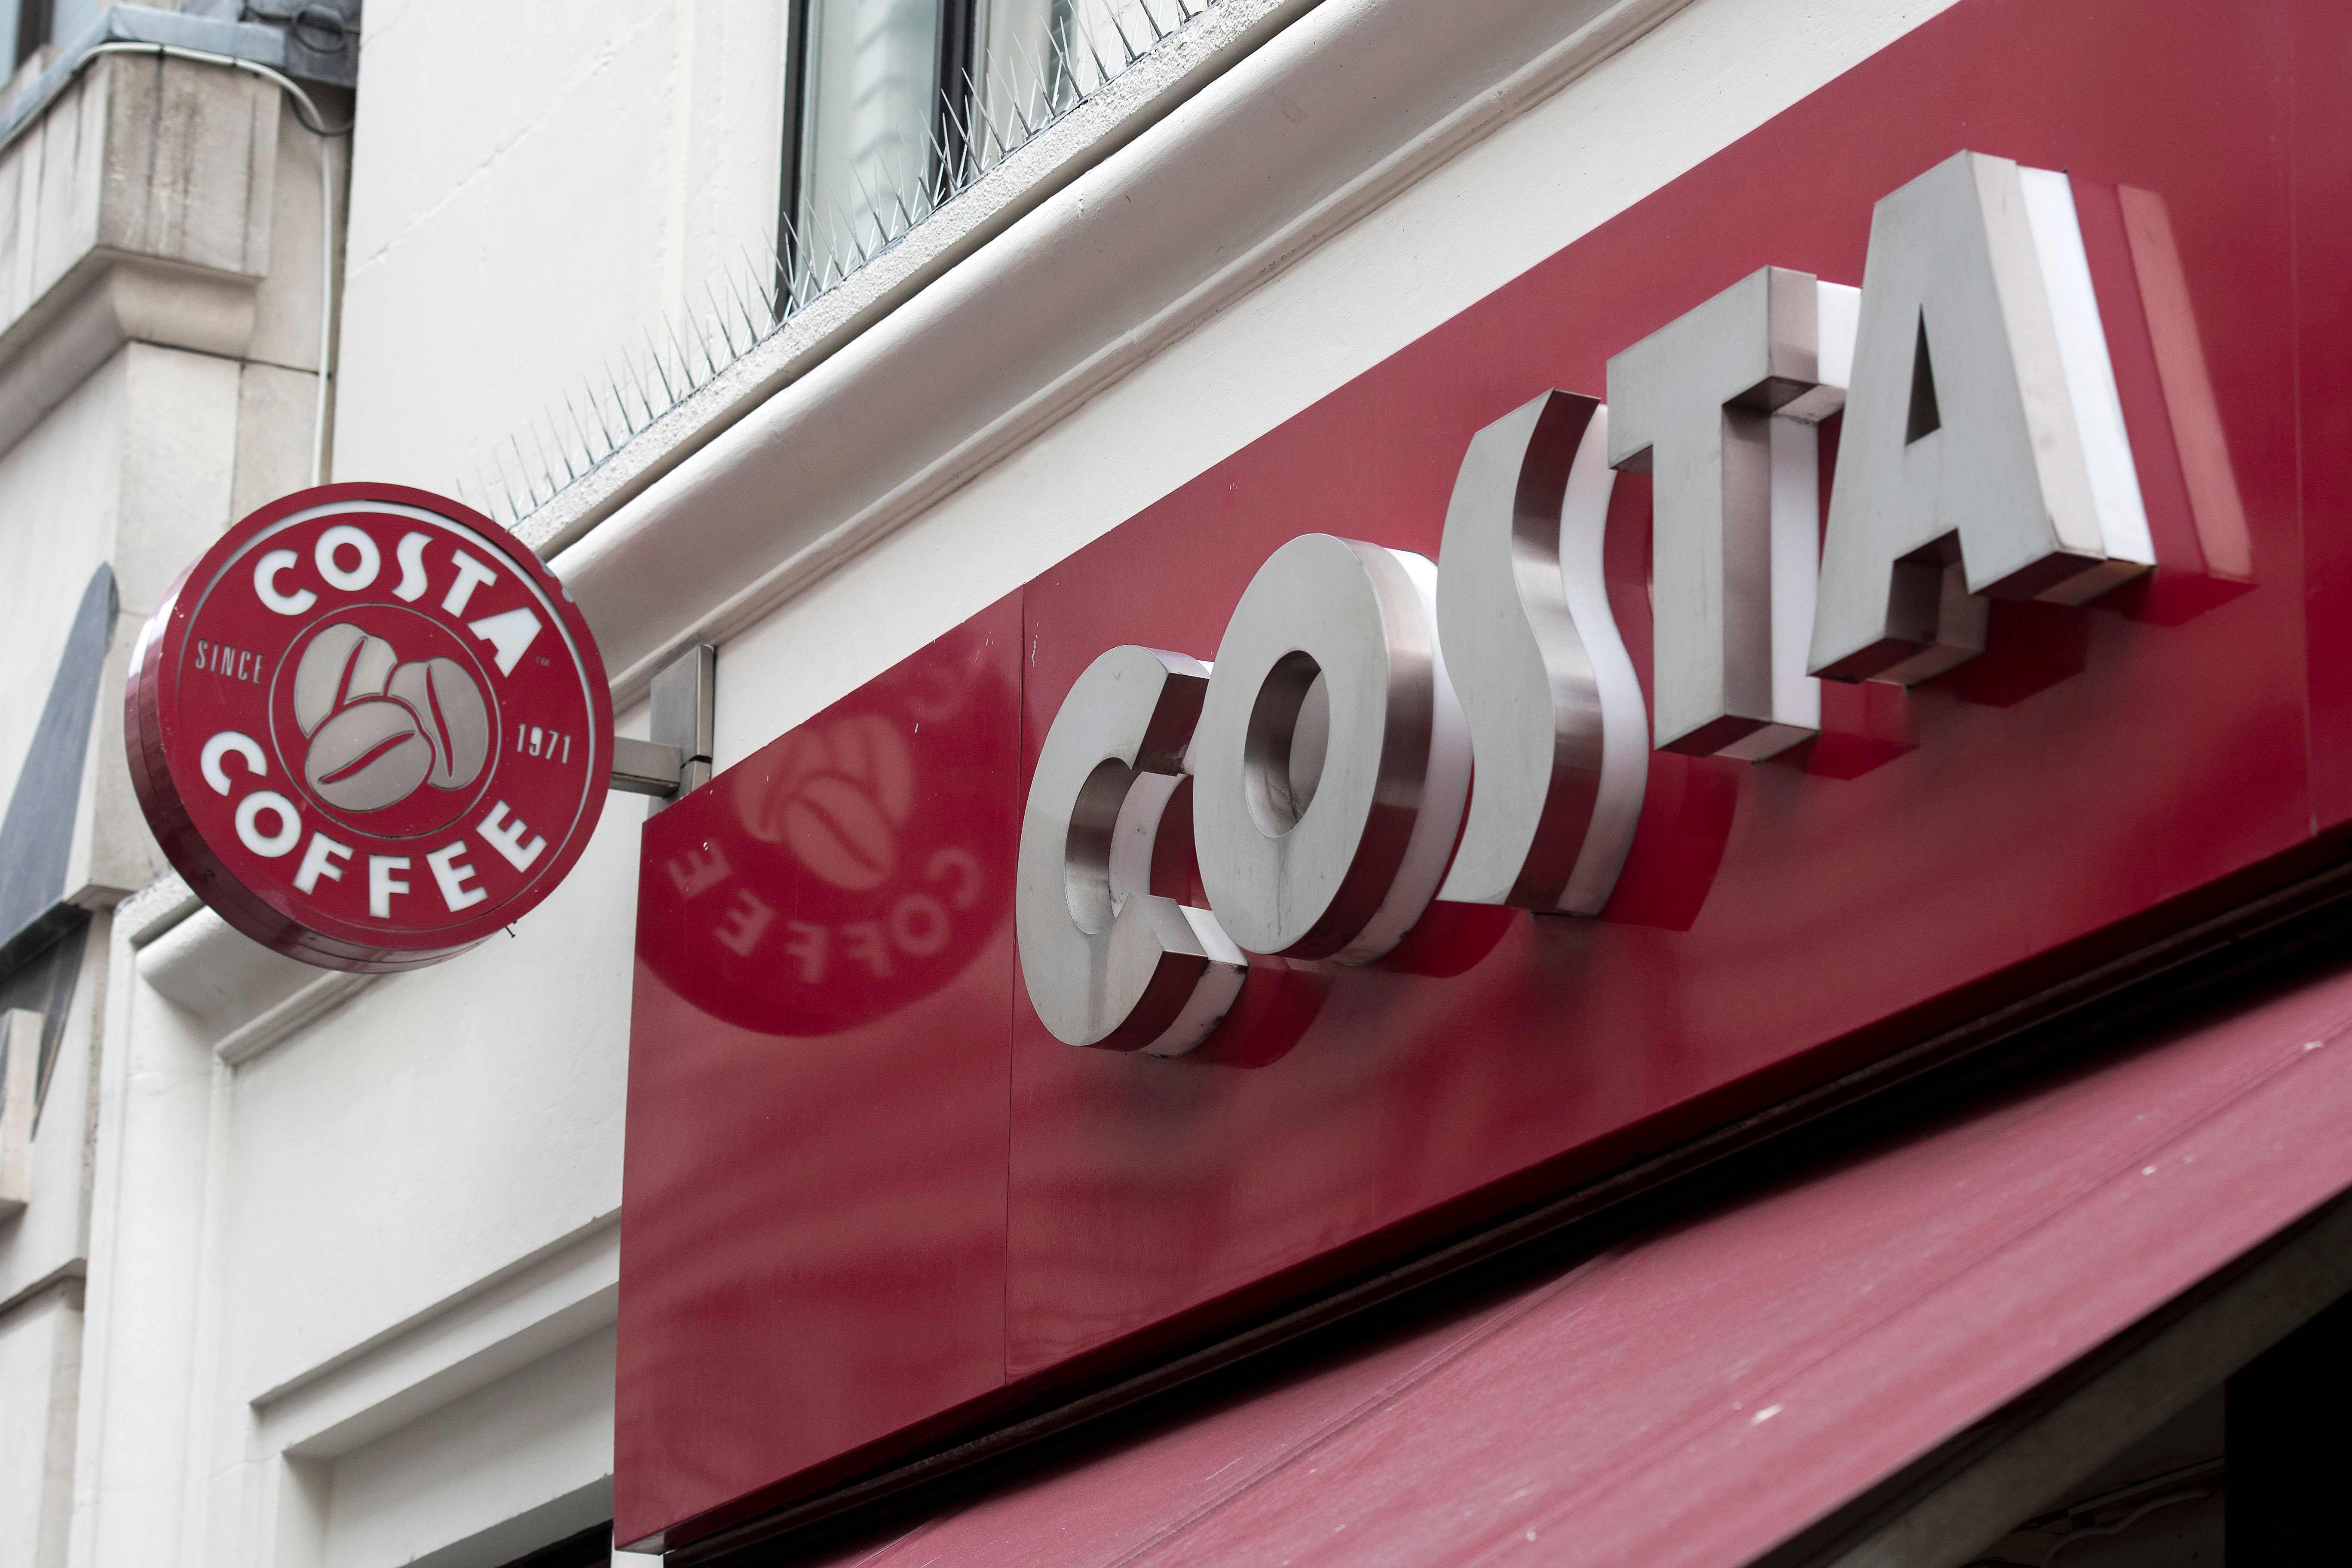 Costa said it is looking to redeploy staff members to nearby stores